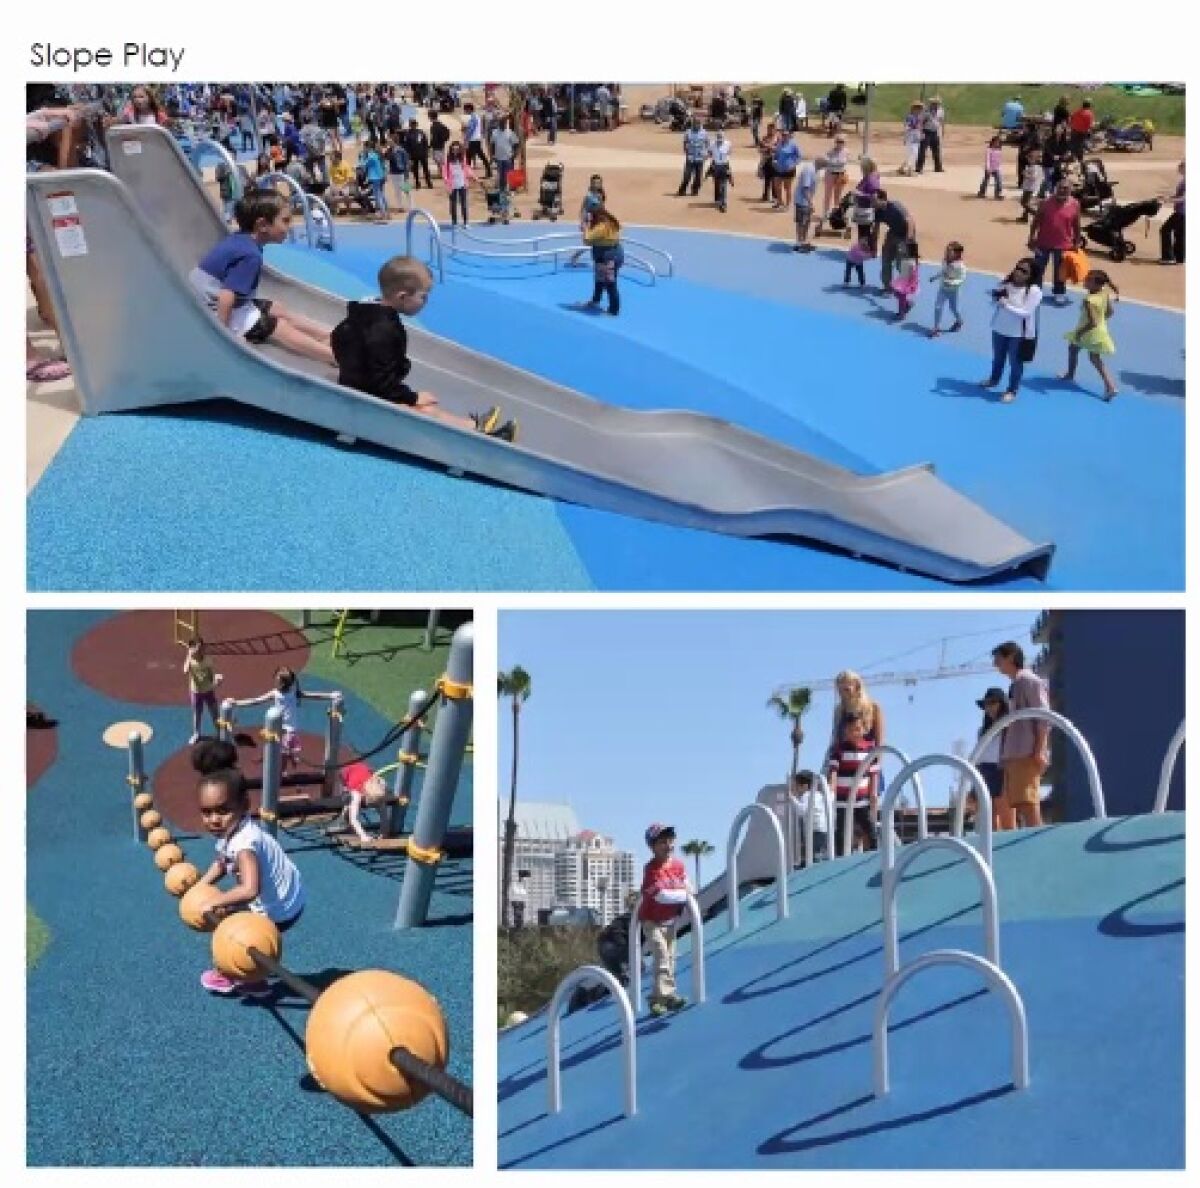 Example of sloped playground features that will be included in the park.